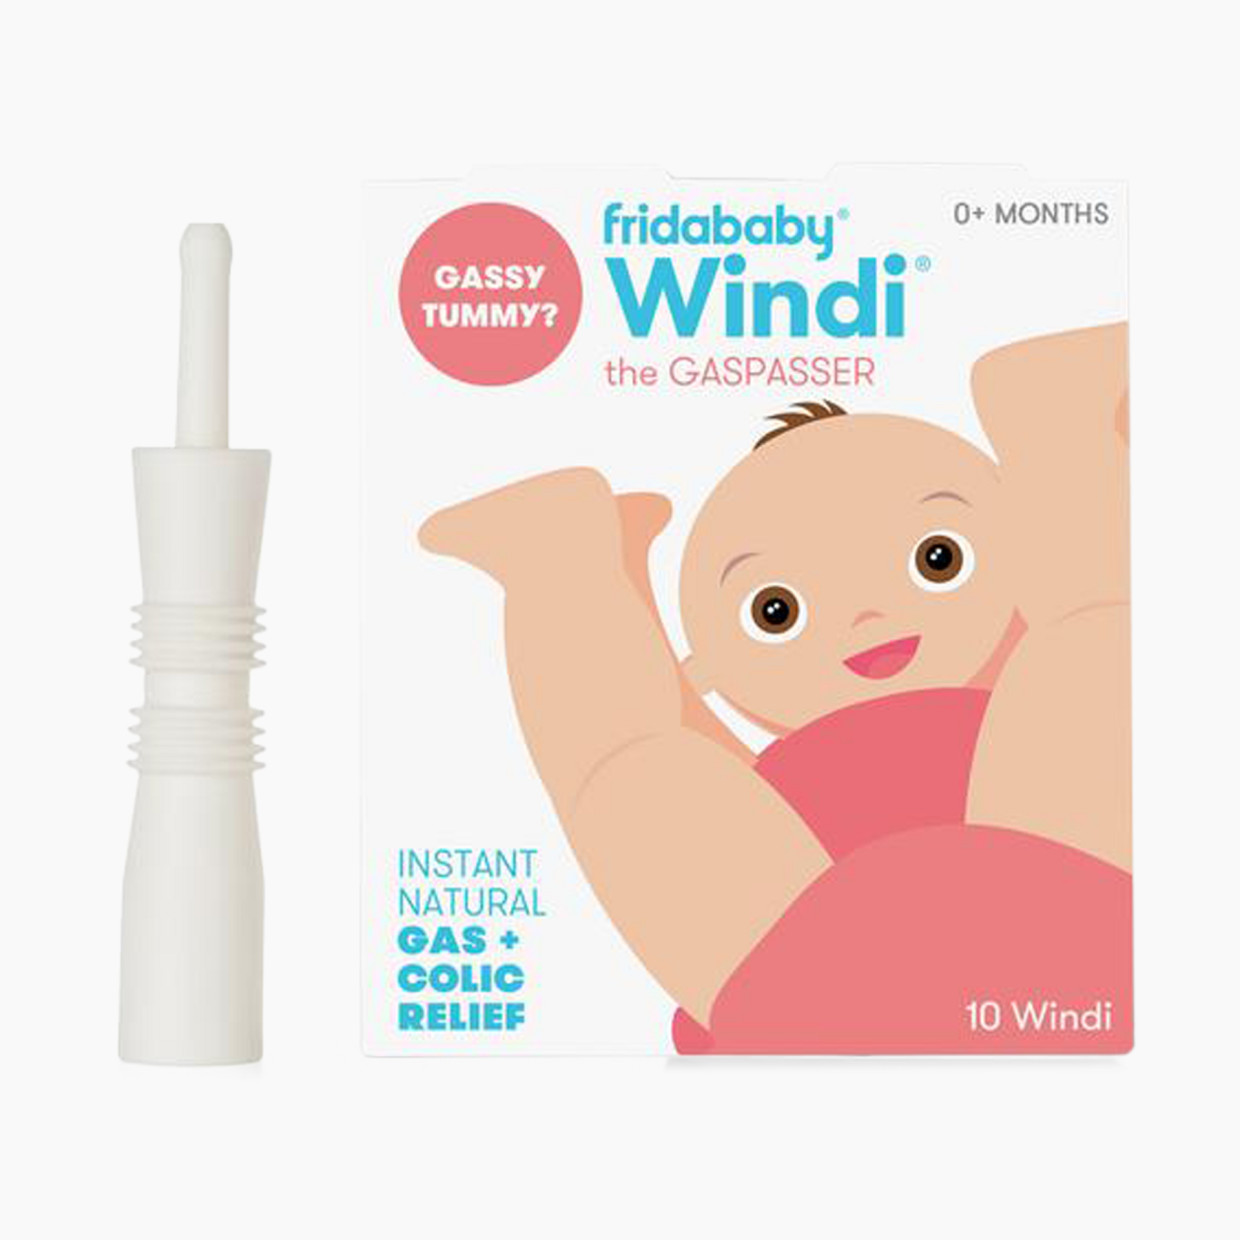 FridaBaby Windi Gas and Colic Reliever.